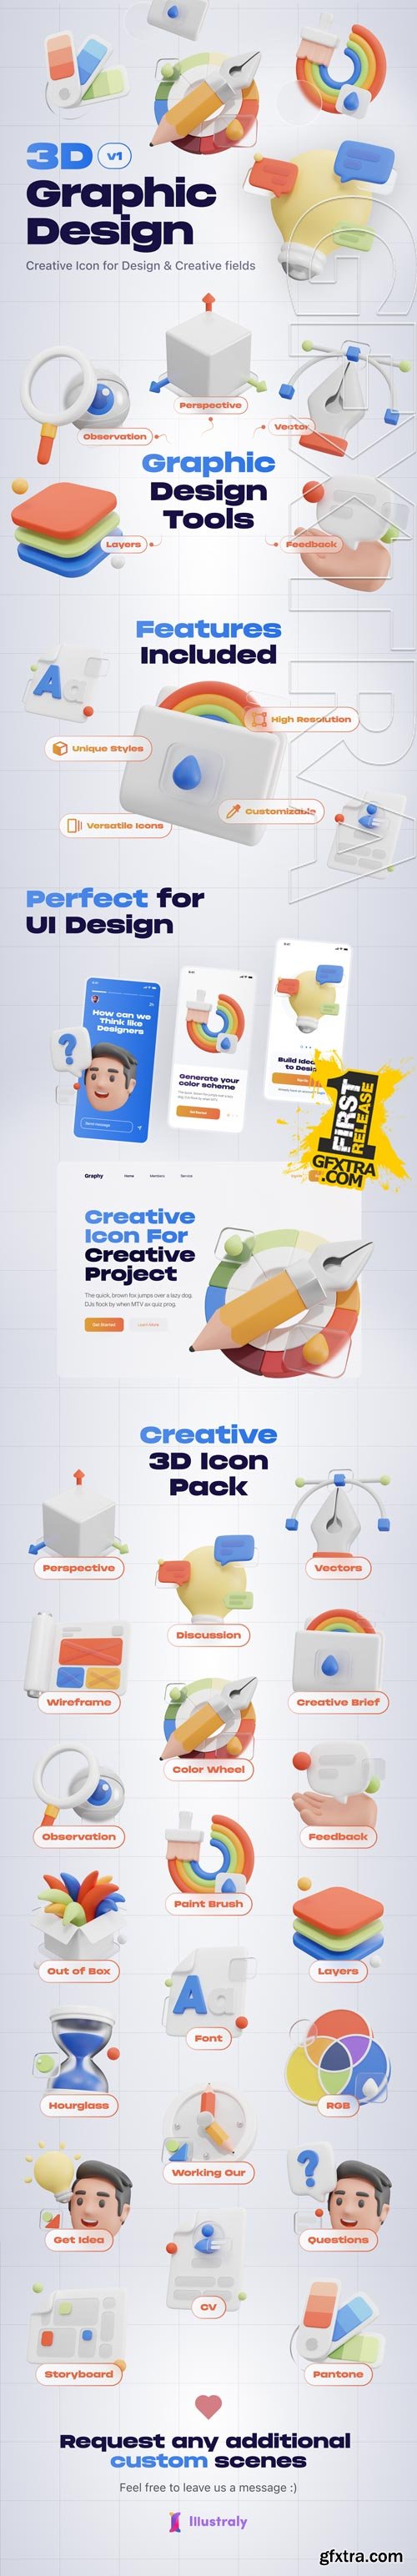 Graphy - Graphic Design Tools 3D Icon Set Model